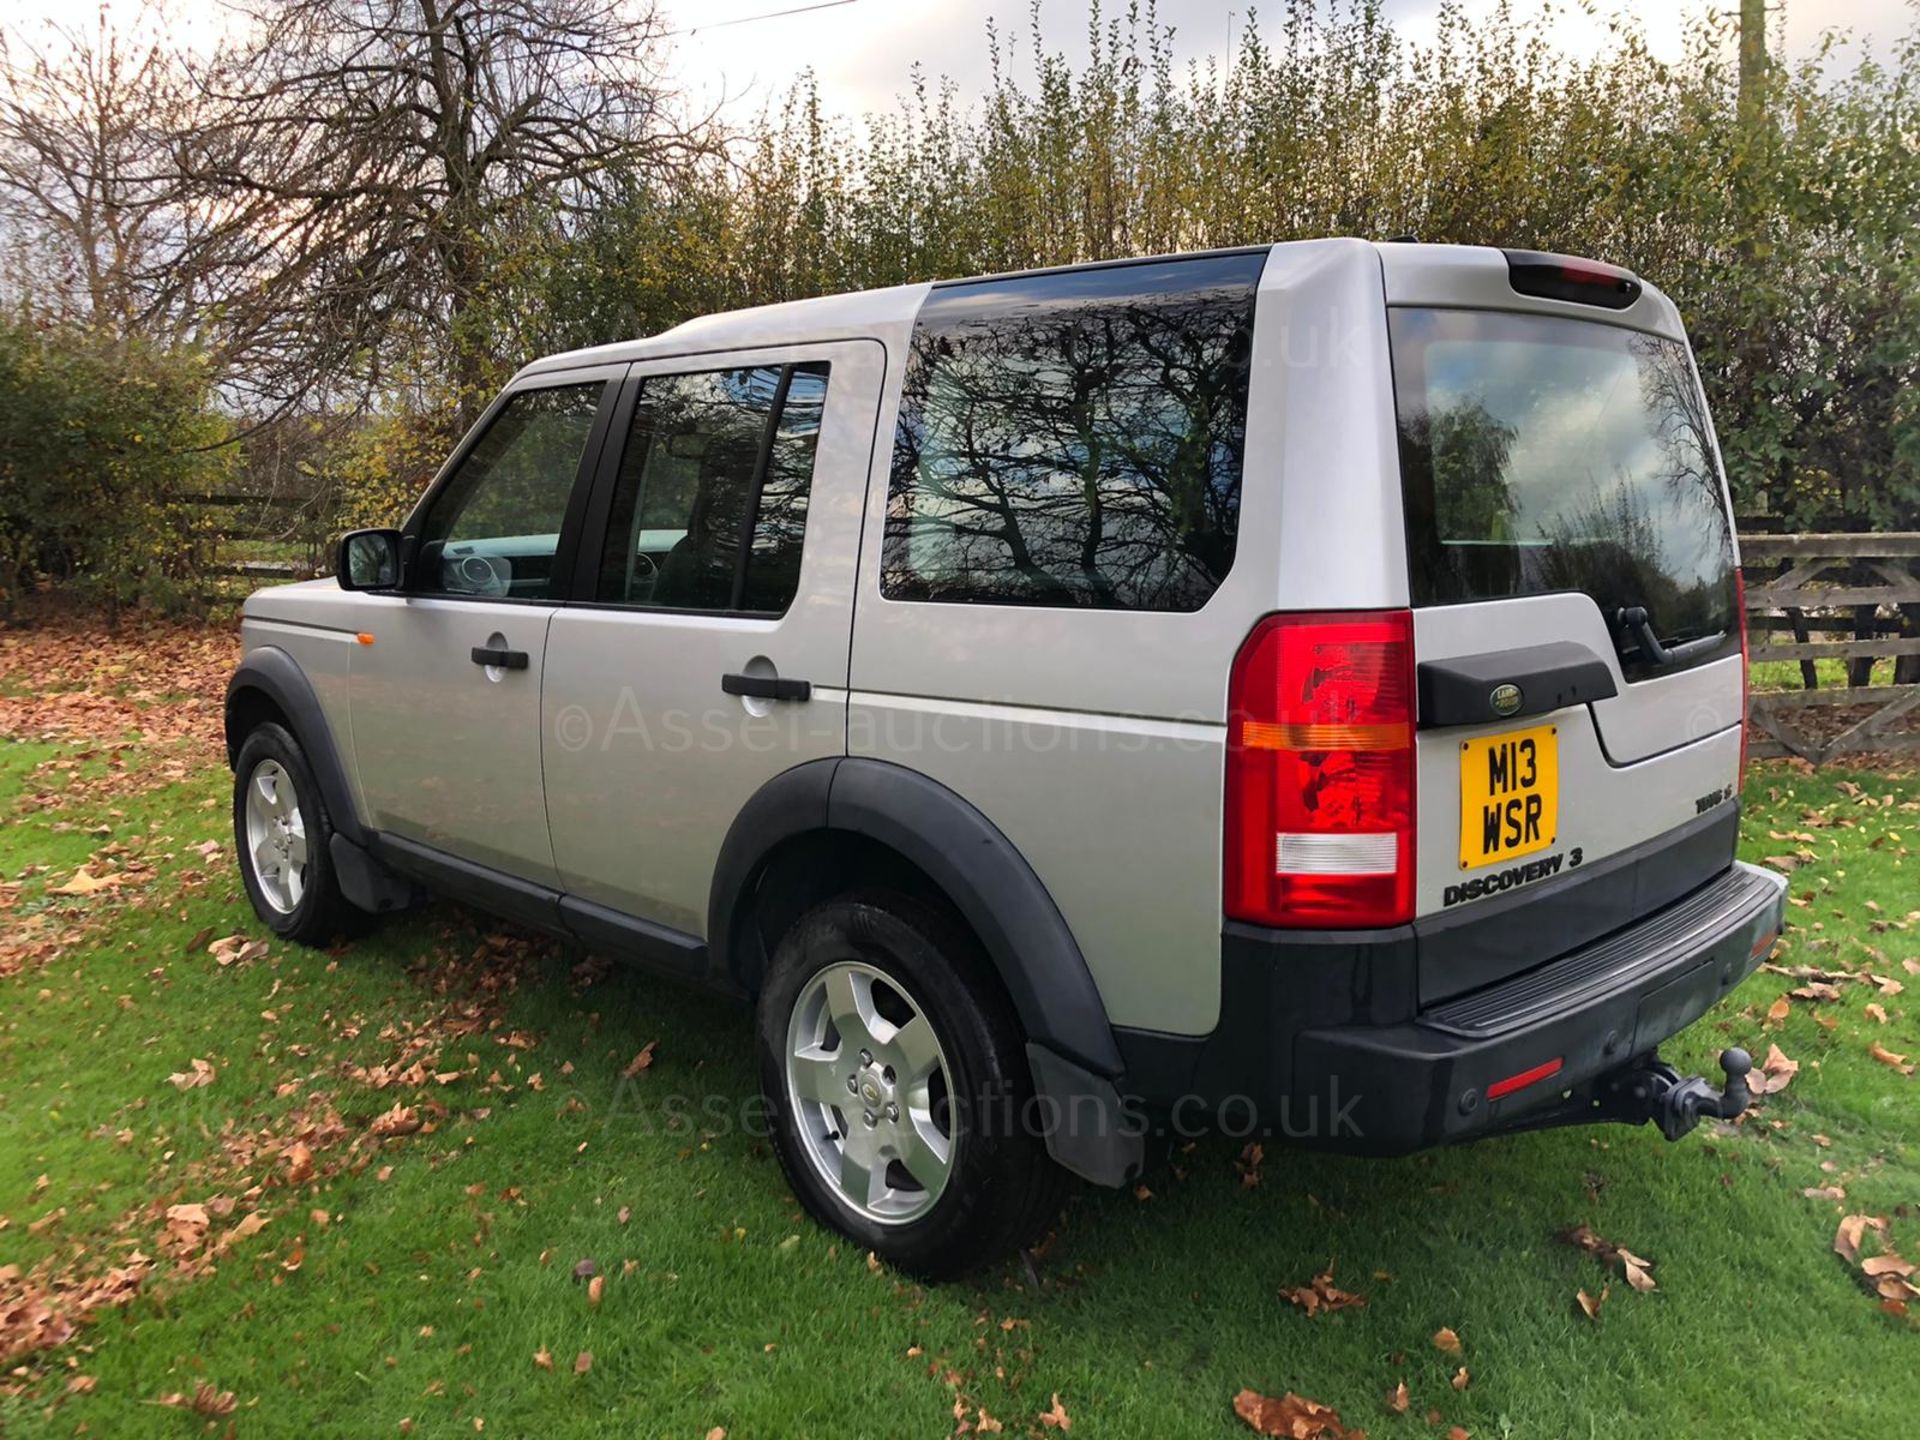 2005 LAND ROVER DISCOVERY 3 TDV6 S AUTO SILVER ESTATE, 146,941 MILES *NO VAT* - Image 5 of 17